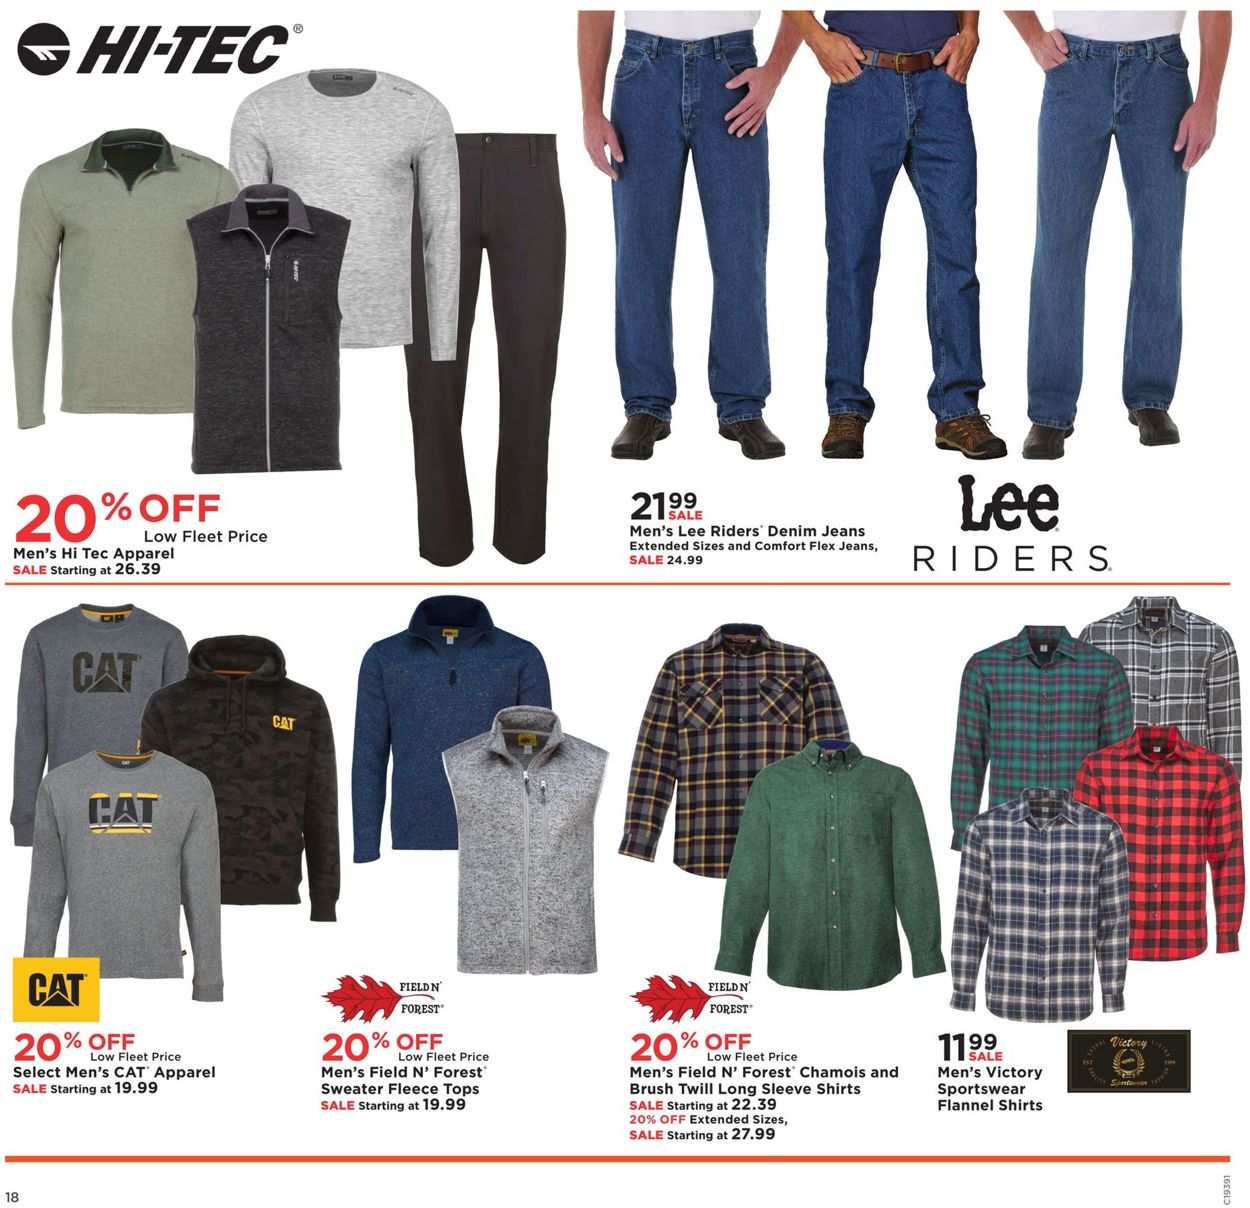 Mills Fleet Farm Current weekly ad 09/20 - 09/28/2019 [18] - frequent ...